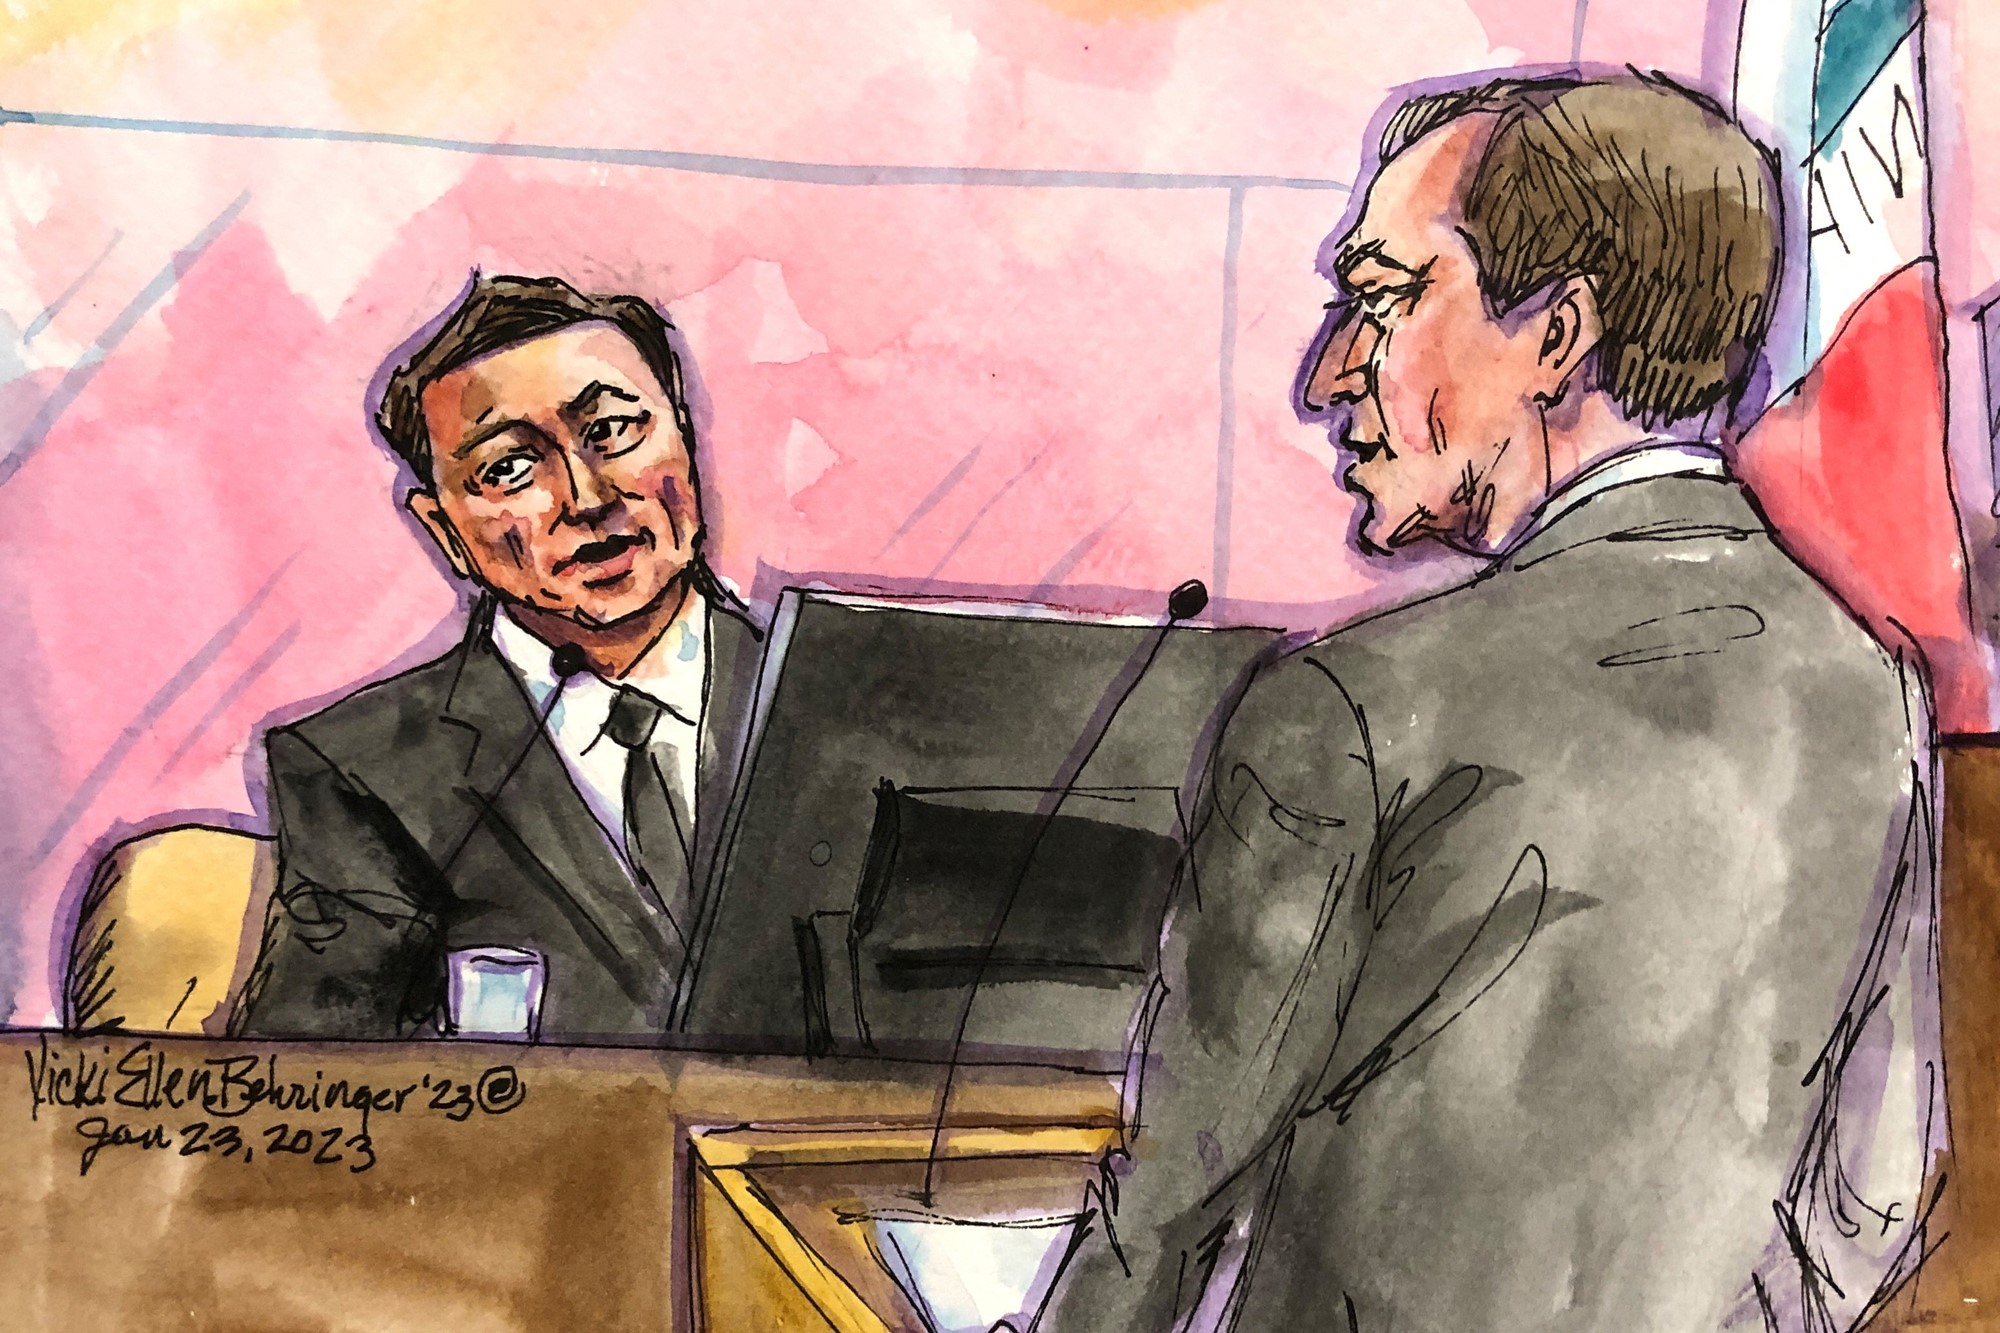 Musk on the stand in court drawing